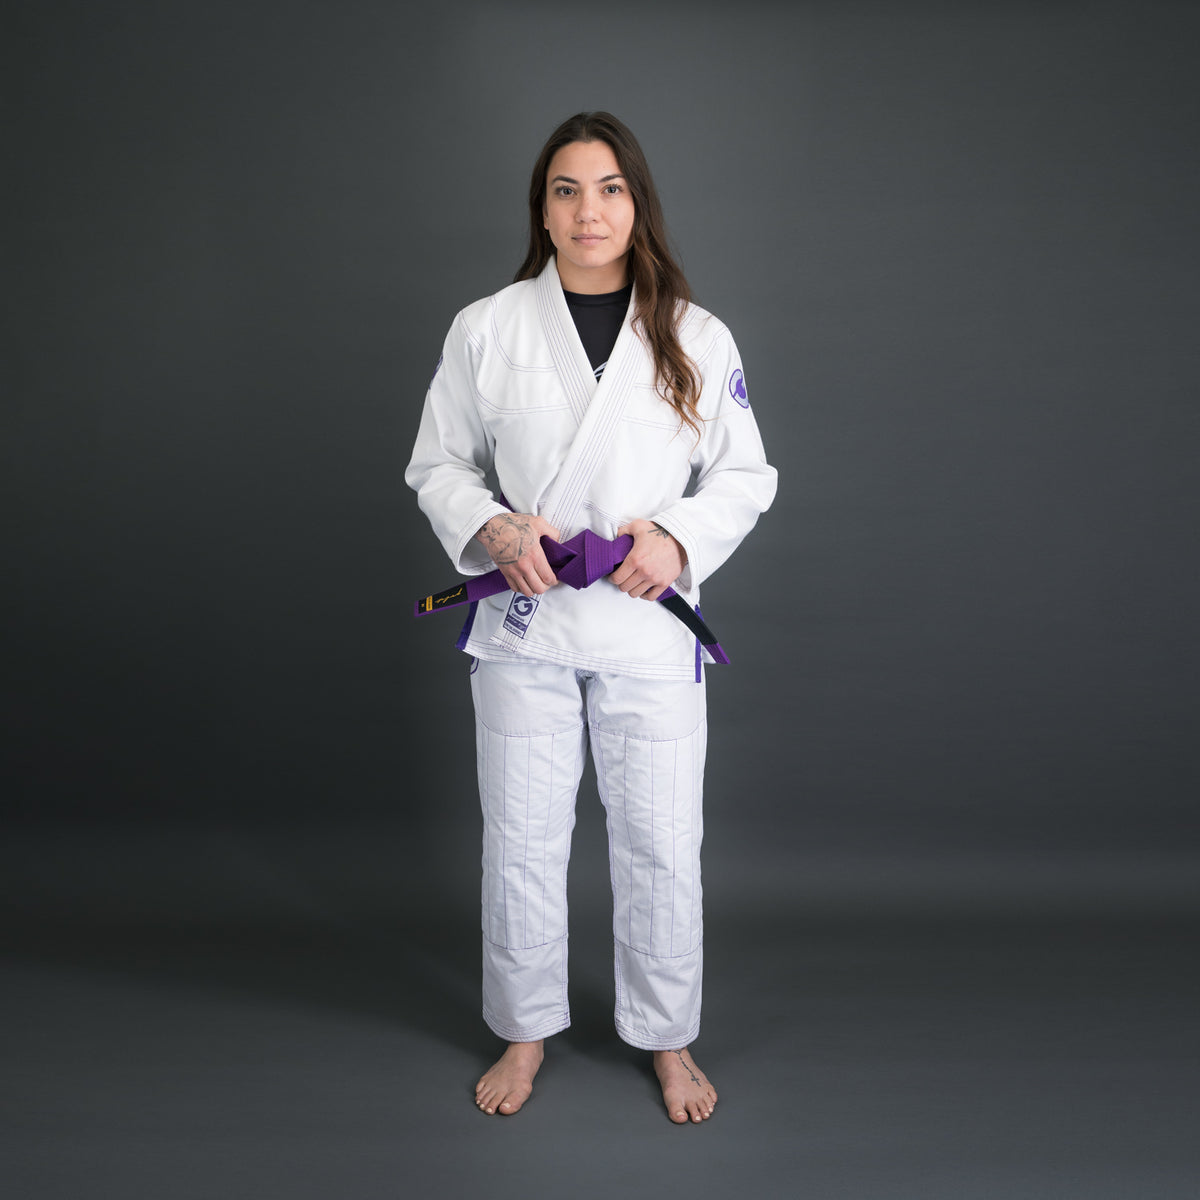 Wholesale purple boxing robes For Proper Martial Art Training Gear